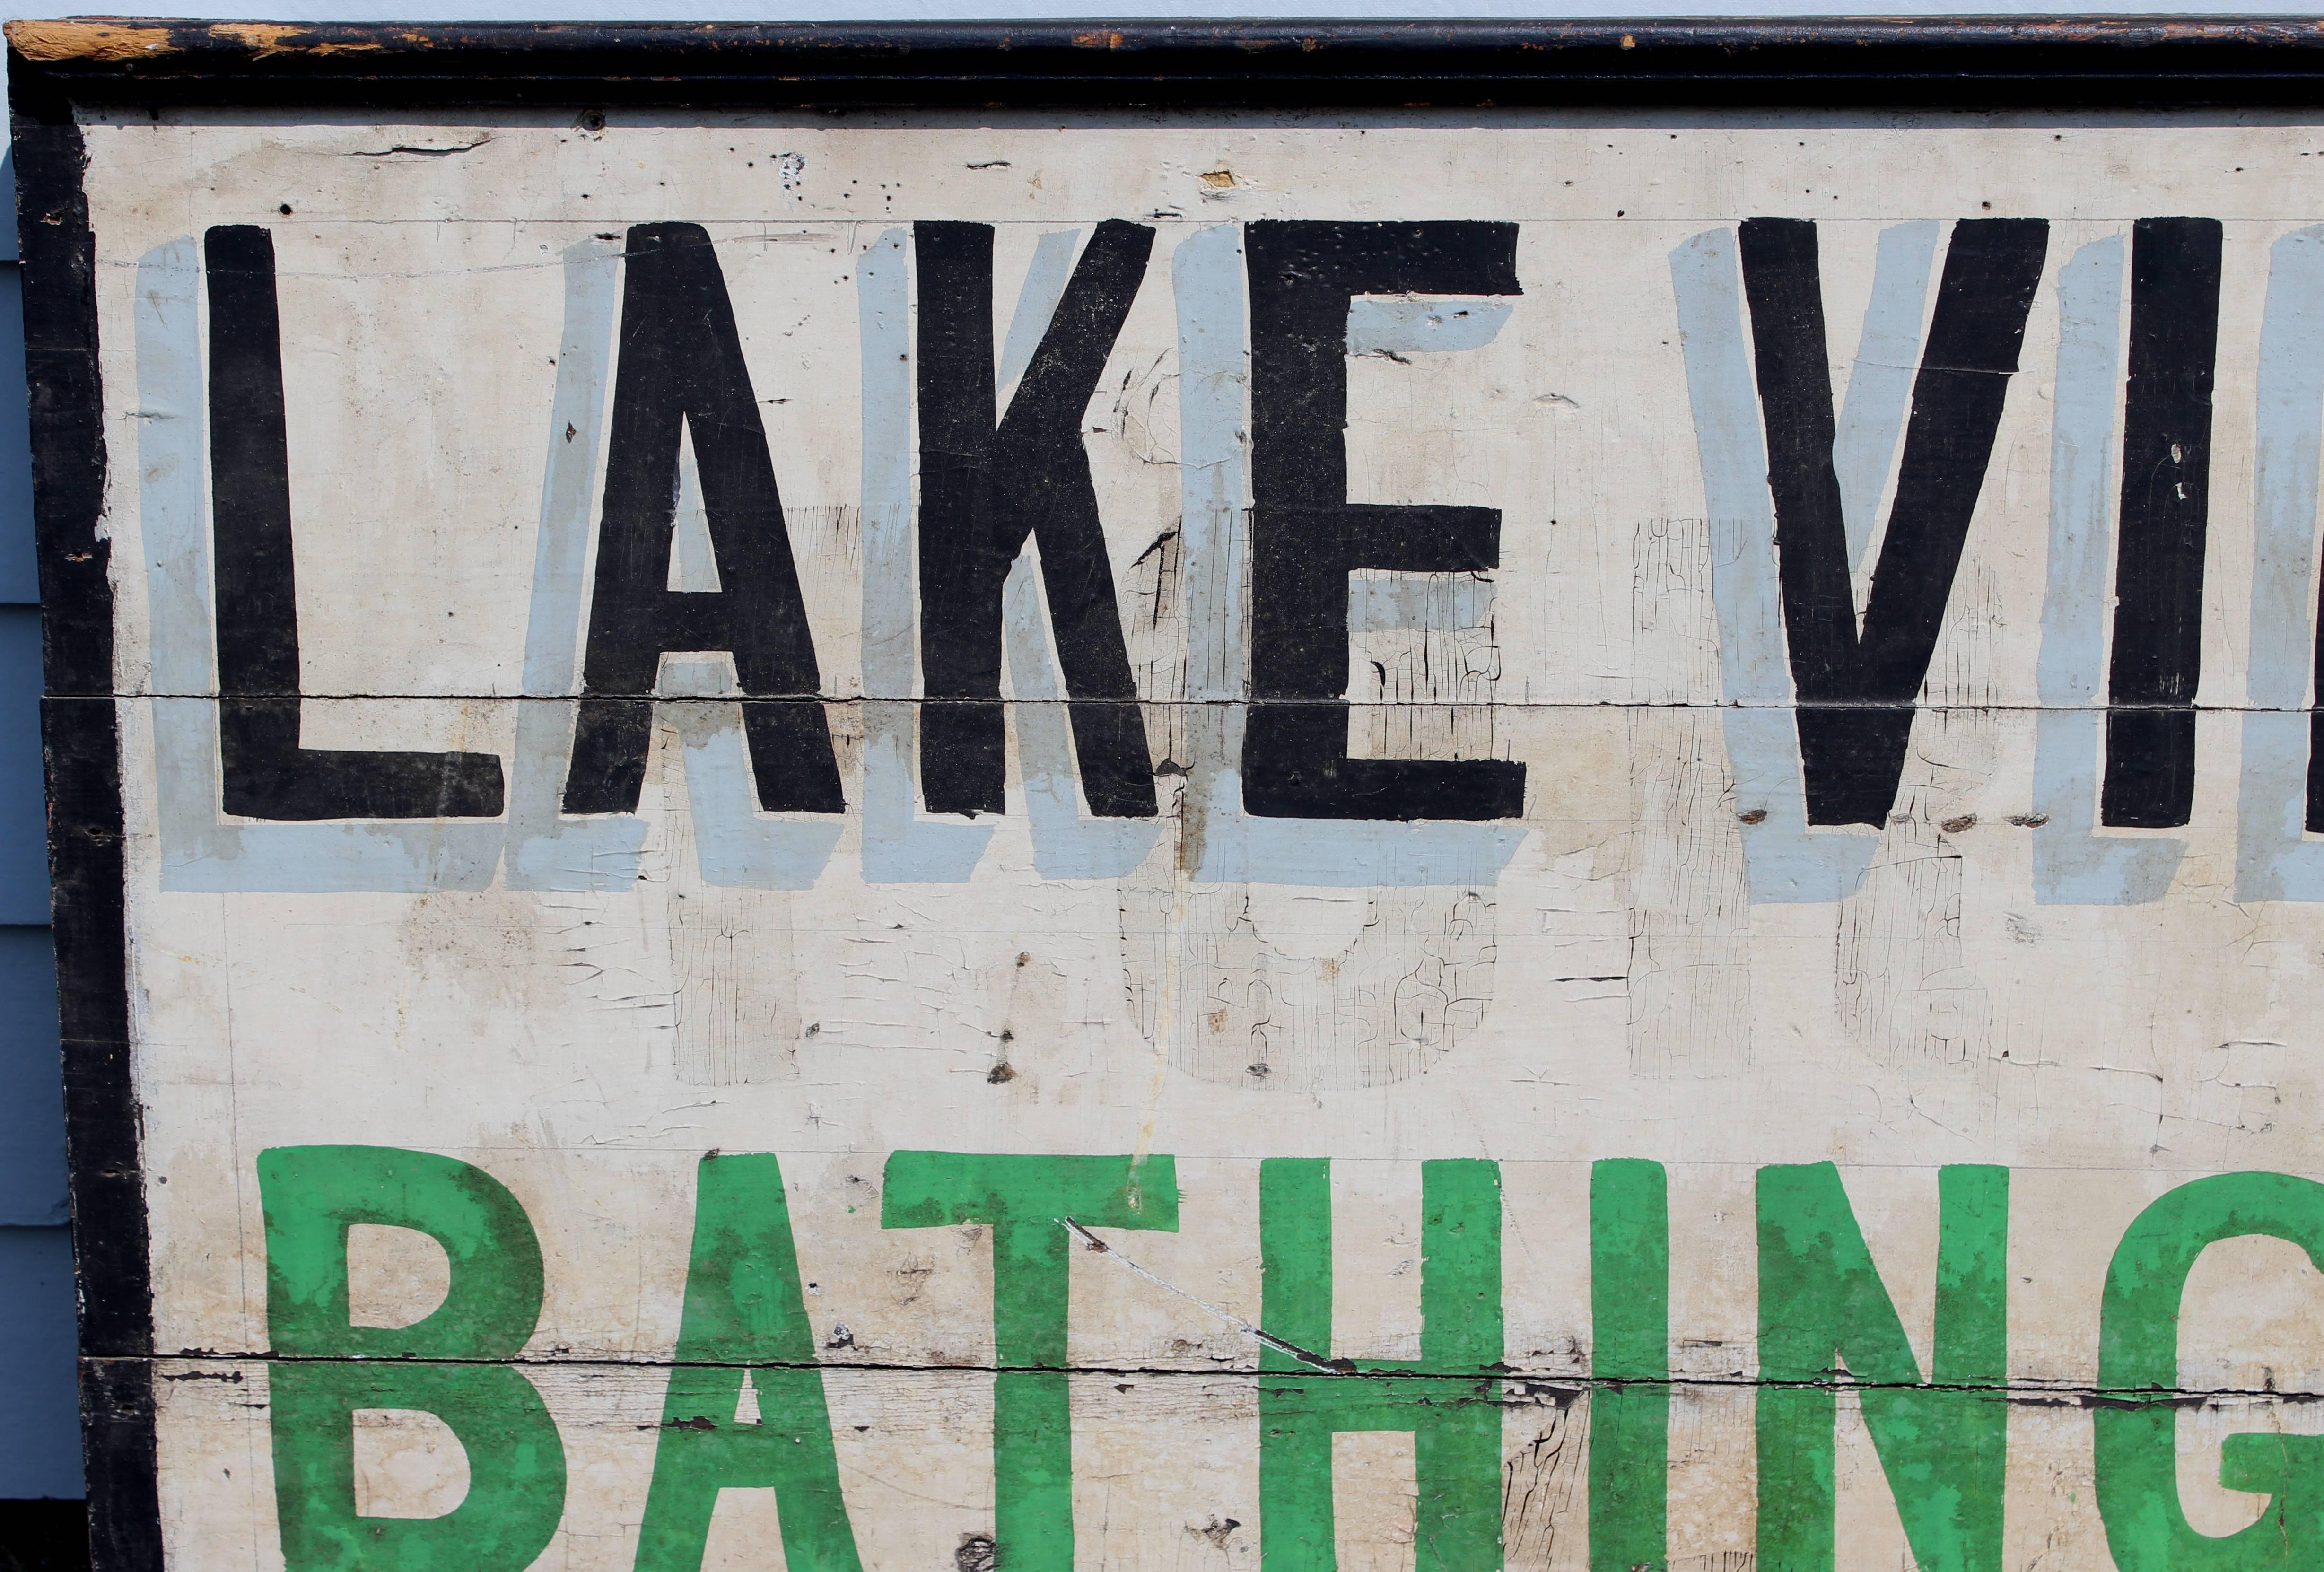 A great wooden hand-painted advertising sign, probably dating from the early-mid-20th century, for Lake View Beach bathing and bath houses, painted on tongue and groove boards, and secured with two support boards on verso. Only one of the four